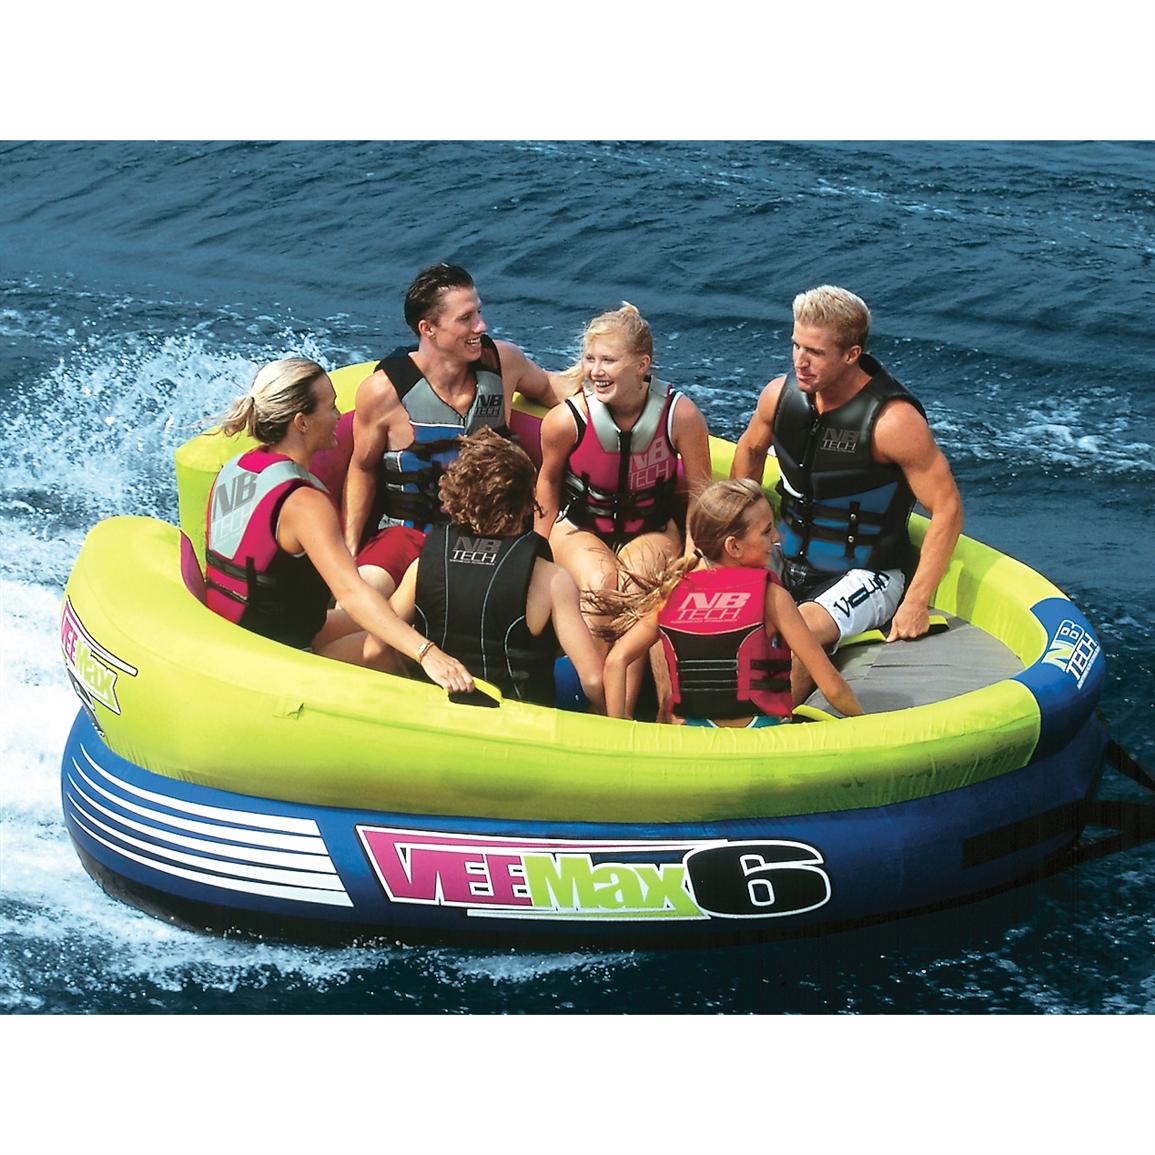 VeeMax6™ 6 person Towable 138845, Tubes & Towables at Sportsman's Guide